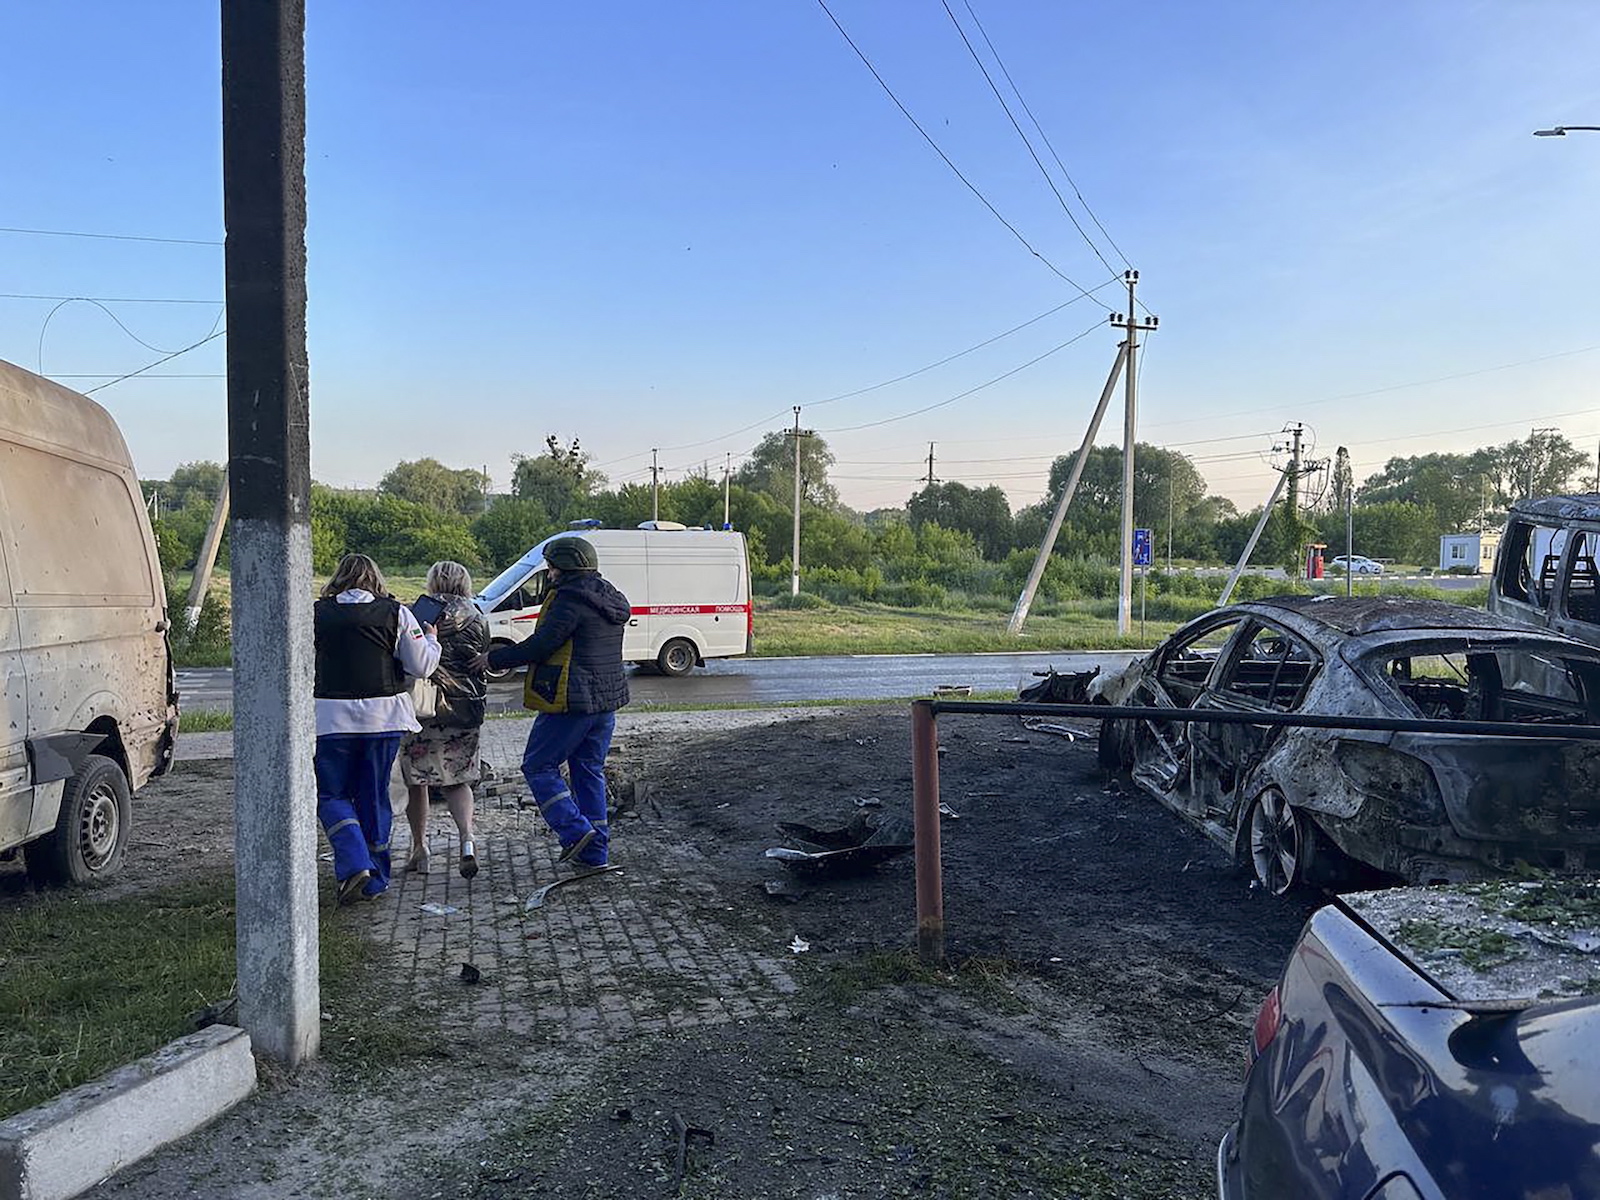 epa10664805 A handout photo made available by the Governor of Russia's Belgorod region Vyacheslav Gladkov on his Telegram channel shows the aftermath of Ukrainian shelling in the border town of Shebekino, Belgorod region, Russia, 31 May 2023. Gladkov said that the situation in Shebekino was deteriorating. Evacuation of children from the Shebekinsky and Grayvoronsky districts of the Belgorod region was set to begin on 31 May. The first group of 300 people will be sent to the city of Voronezh, the governor added.  EPA/GOVERNOR OF BELGOROD REGION/HANDOUT HANDOUT HANDOUT EDITORIAL USE ONLY/NO SALES HANDOUT EDITORIAL USE ONLY/NO SALES